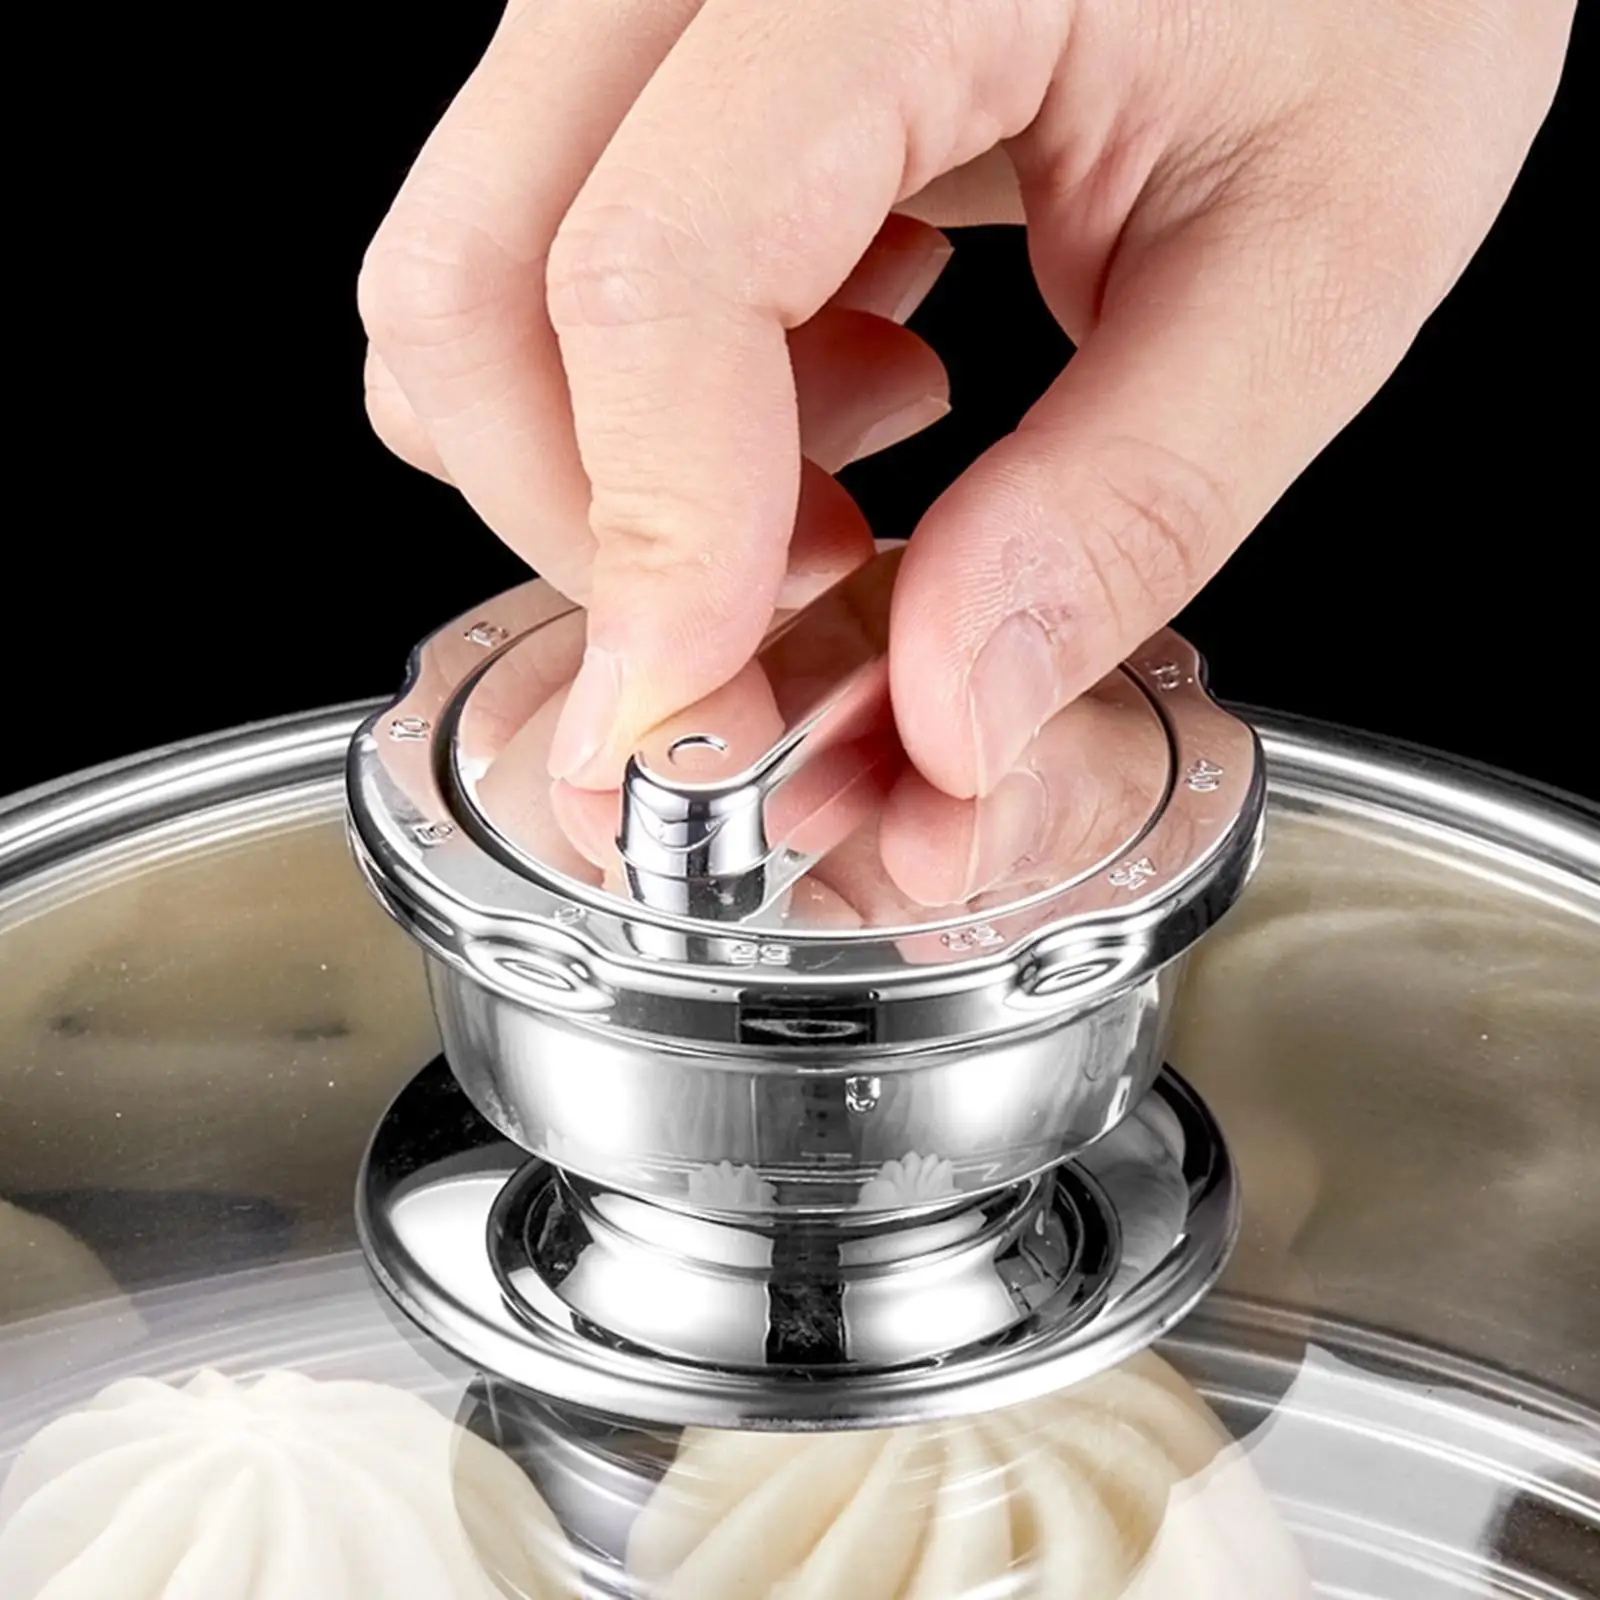 Kitchen Pot Lid Timer Easy to Install Portable Stainless Steel Cooking Timer